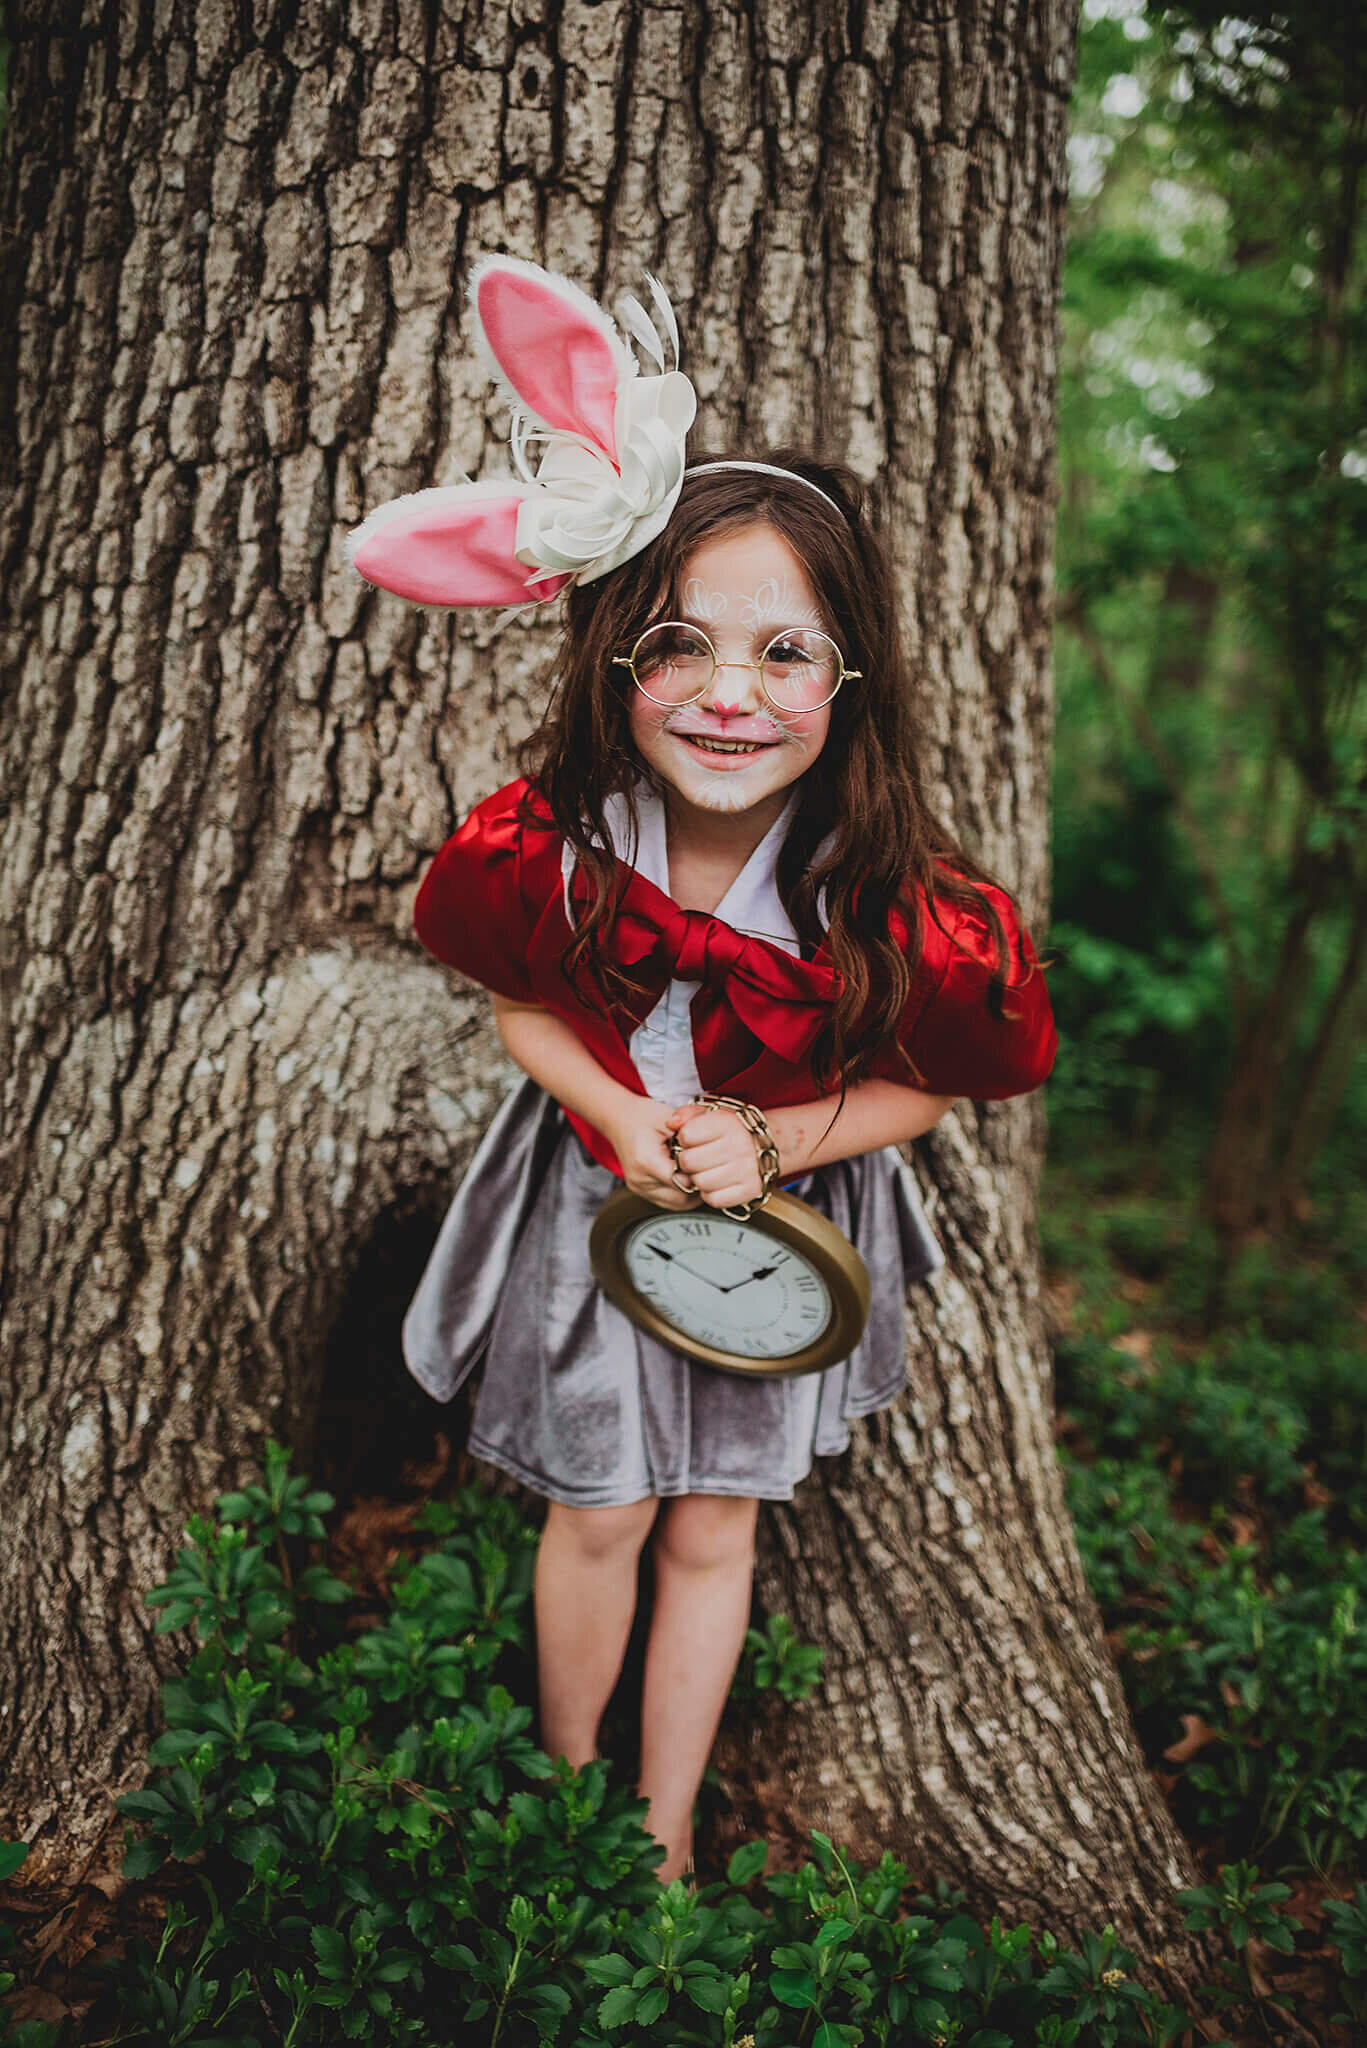 Girl in rabbit ears with red jacket and grey skirt leaning up against a tree